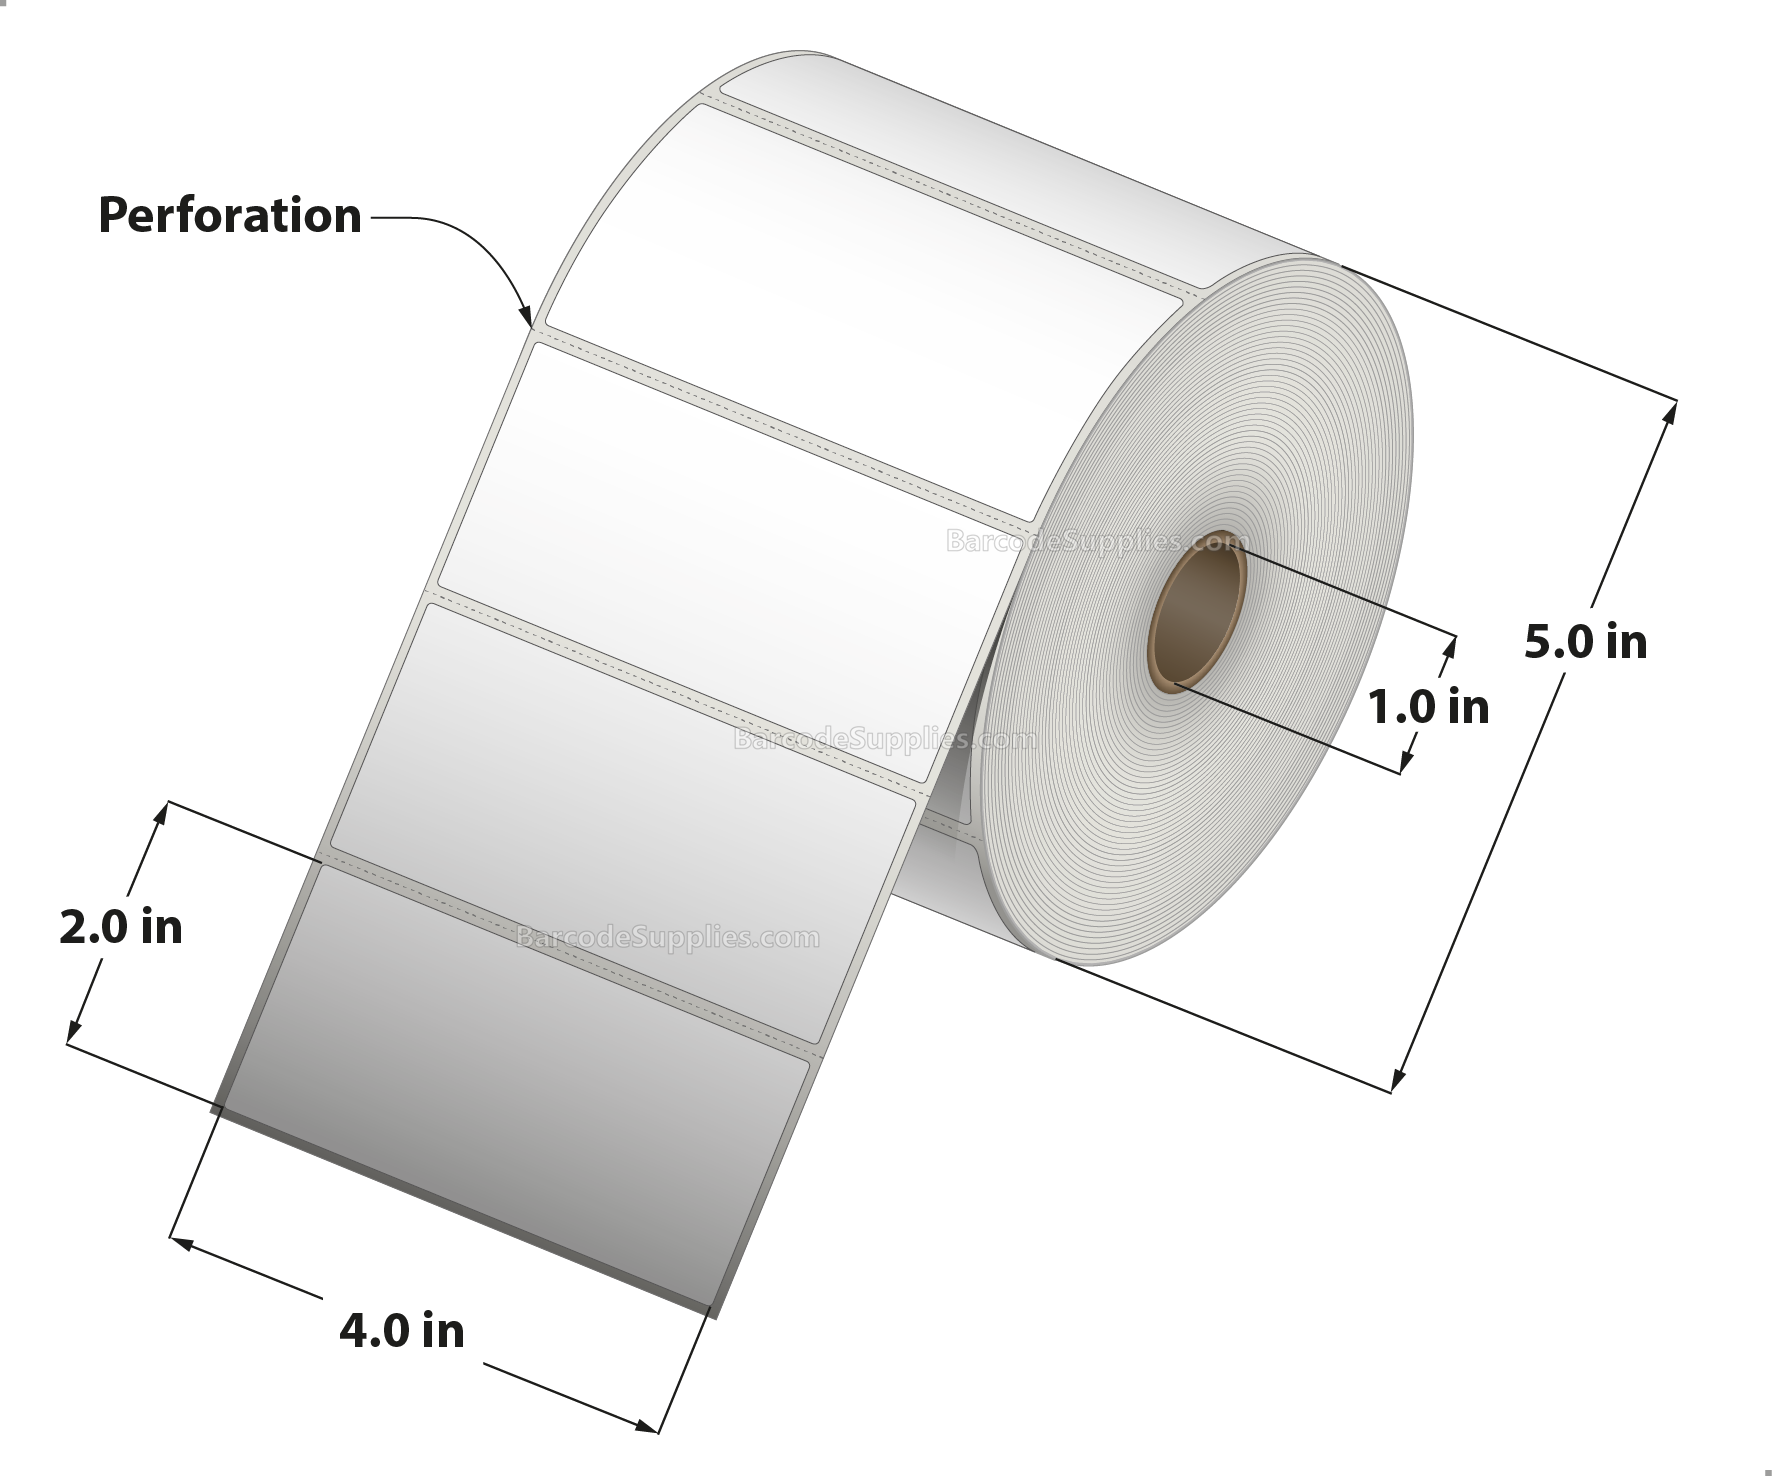 4 x 2 Thermal Transfer White Labels With Permanent Acrylic Adhesive - Perforated - 1250 Labels Per Roll - Carton Of 4 Rolls - 5000 Labels Total - MPN: TH42-15PTT